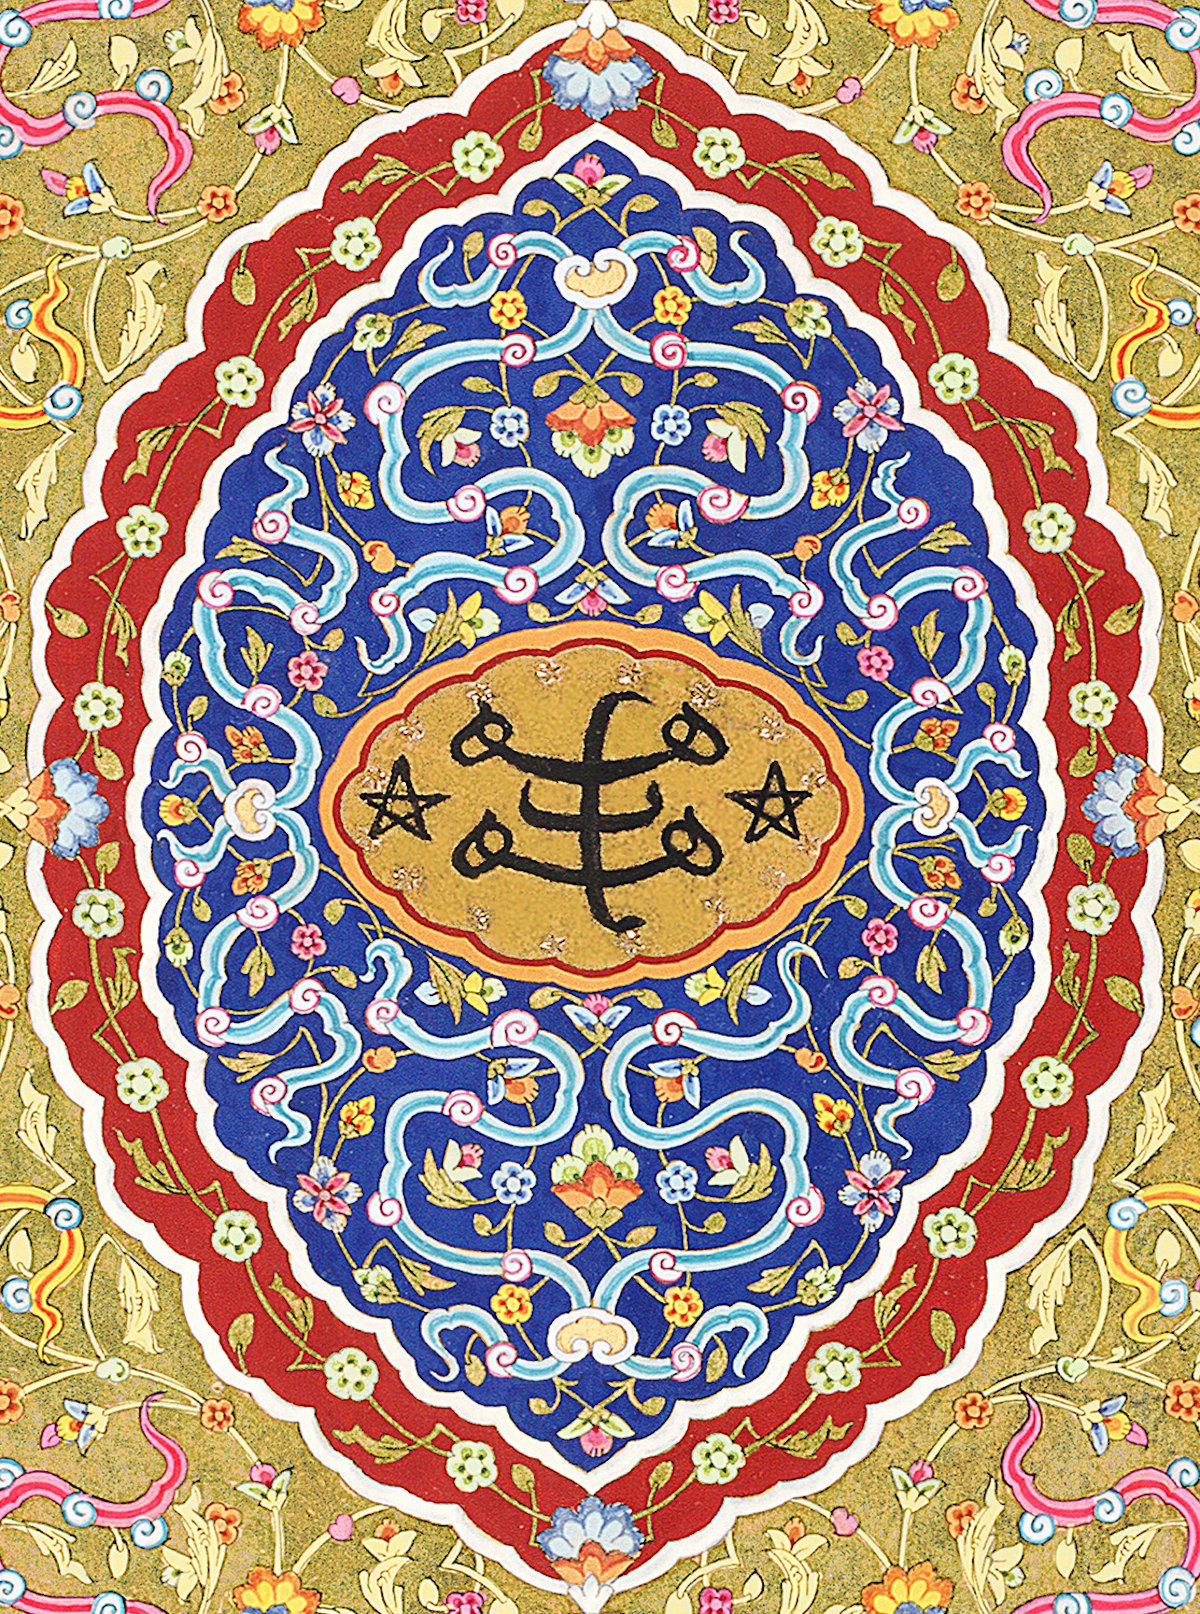 The centerpiece of a calligraphic work by Ayatollah Abdol-Hamid Masoumi-Tehrani showing a symbol known to Baha'is as "The Greatest Name."